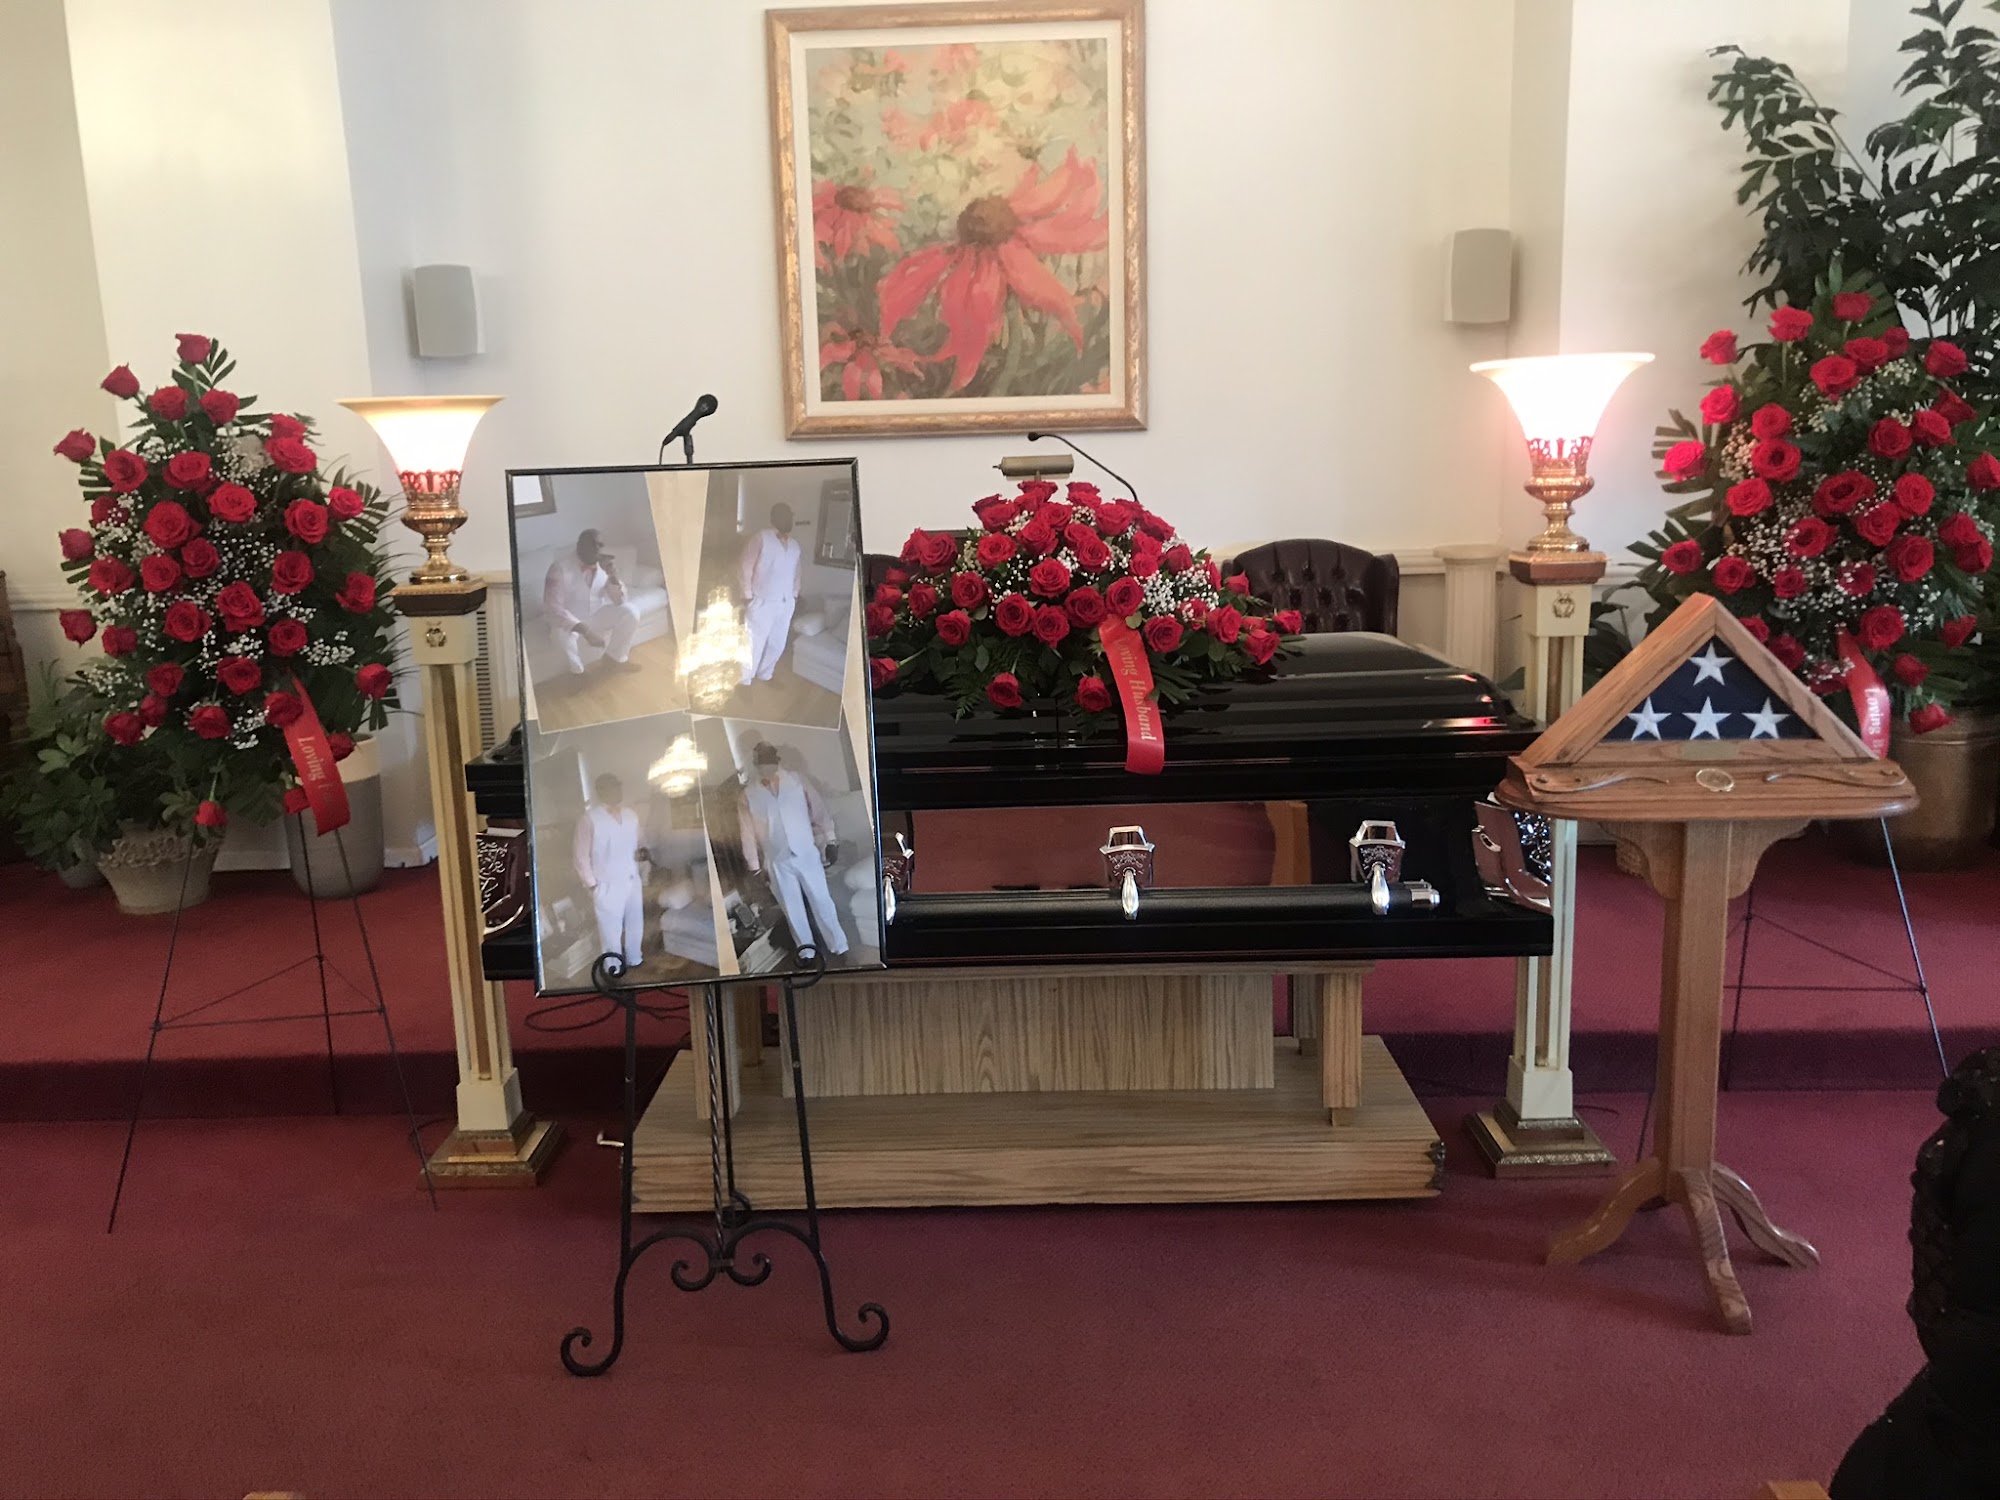 W W Holt Funeral Home 175 W 159th St, Harvey Illinois 60426